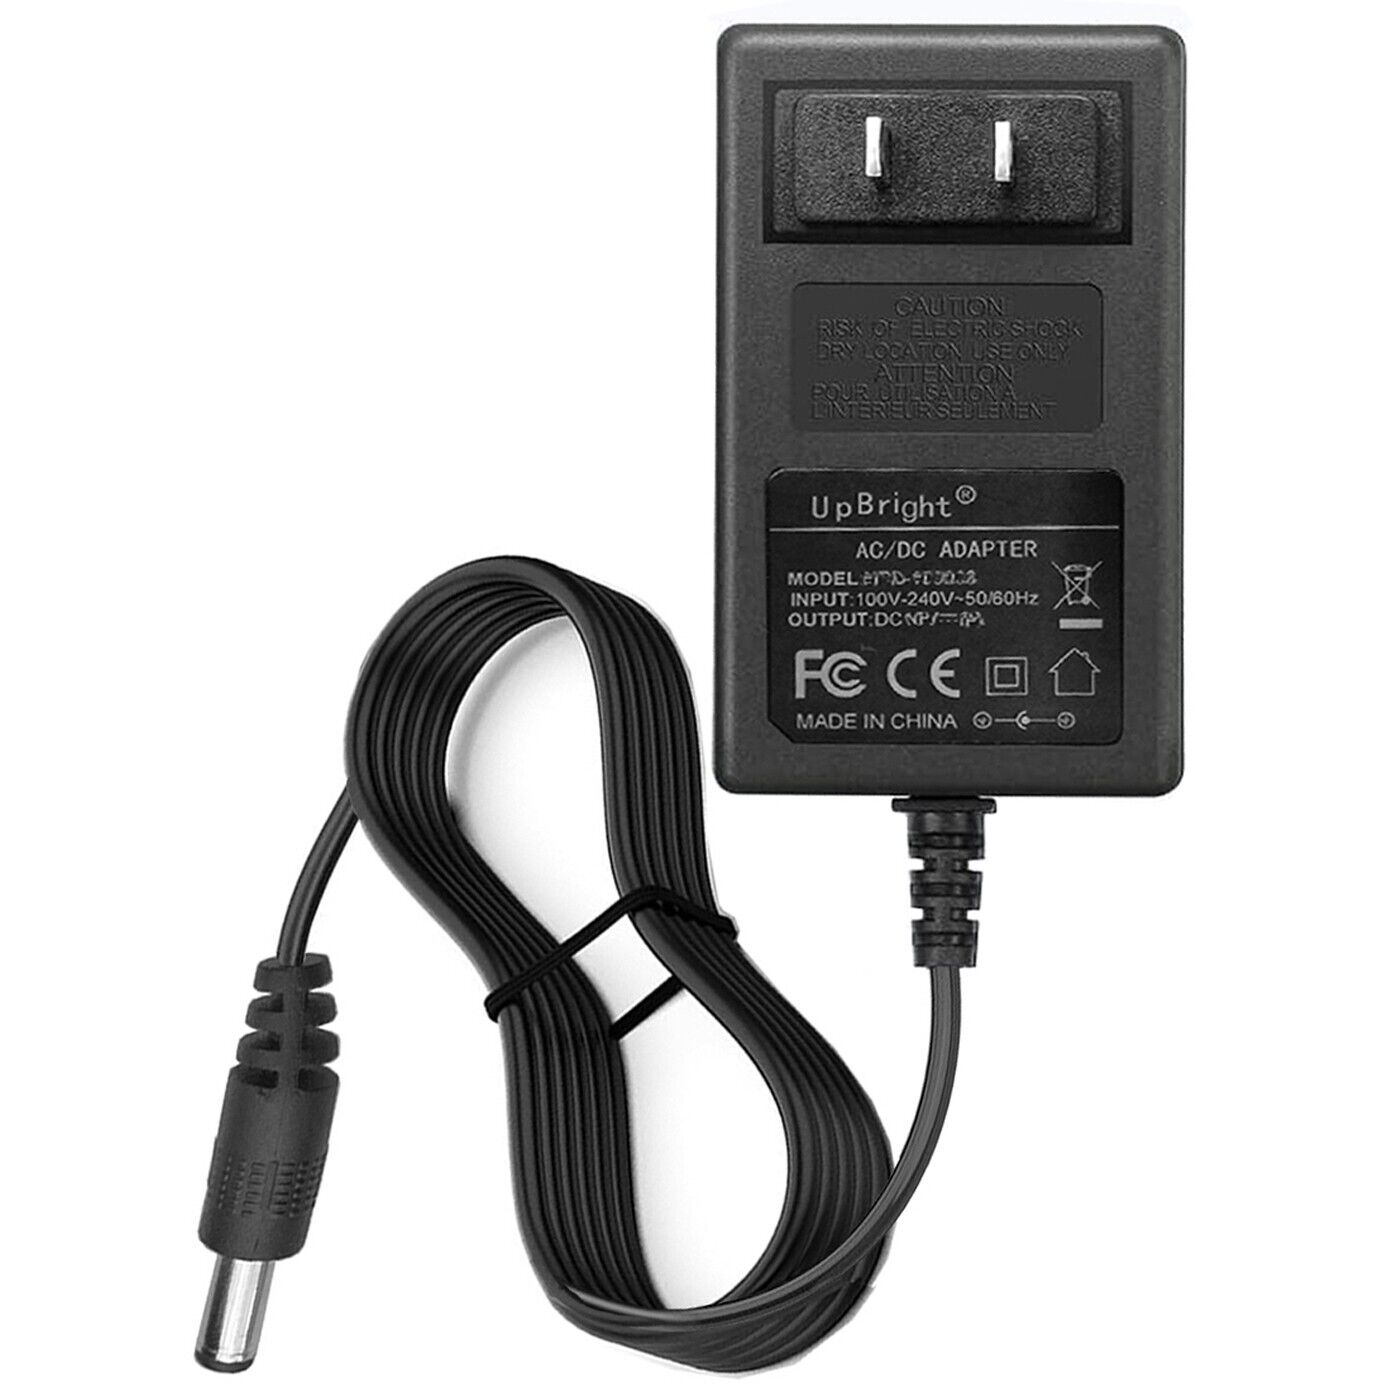 AC Adapter Fr Electrolux Ultimate800 Cordless Stick Vacuum ADC-42FMG-35 35042EPG